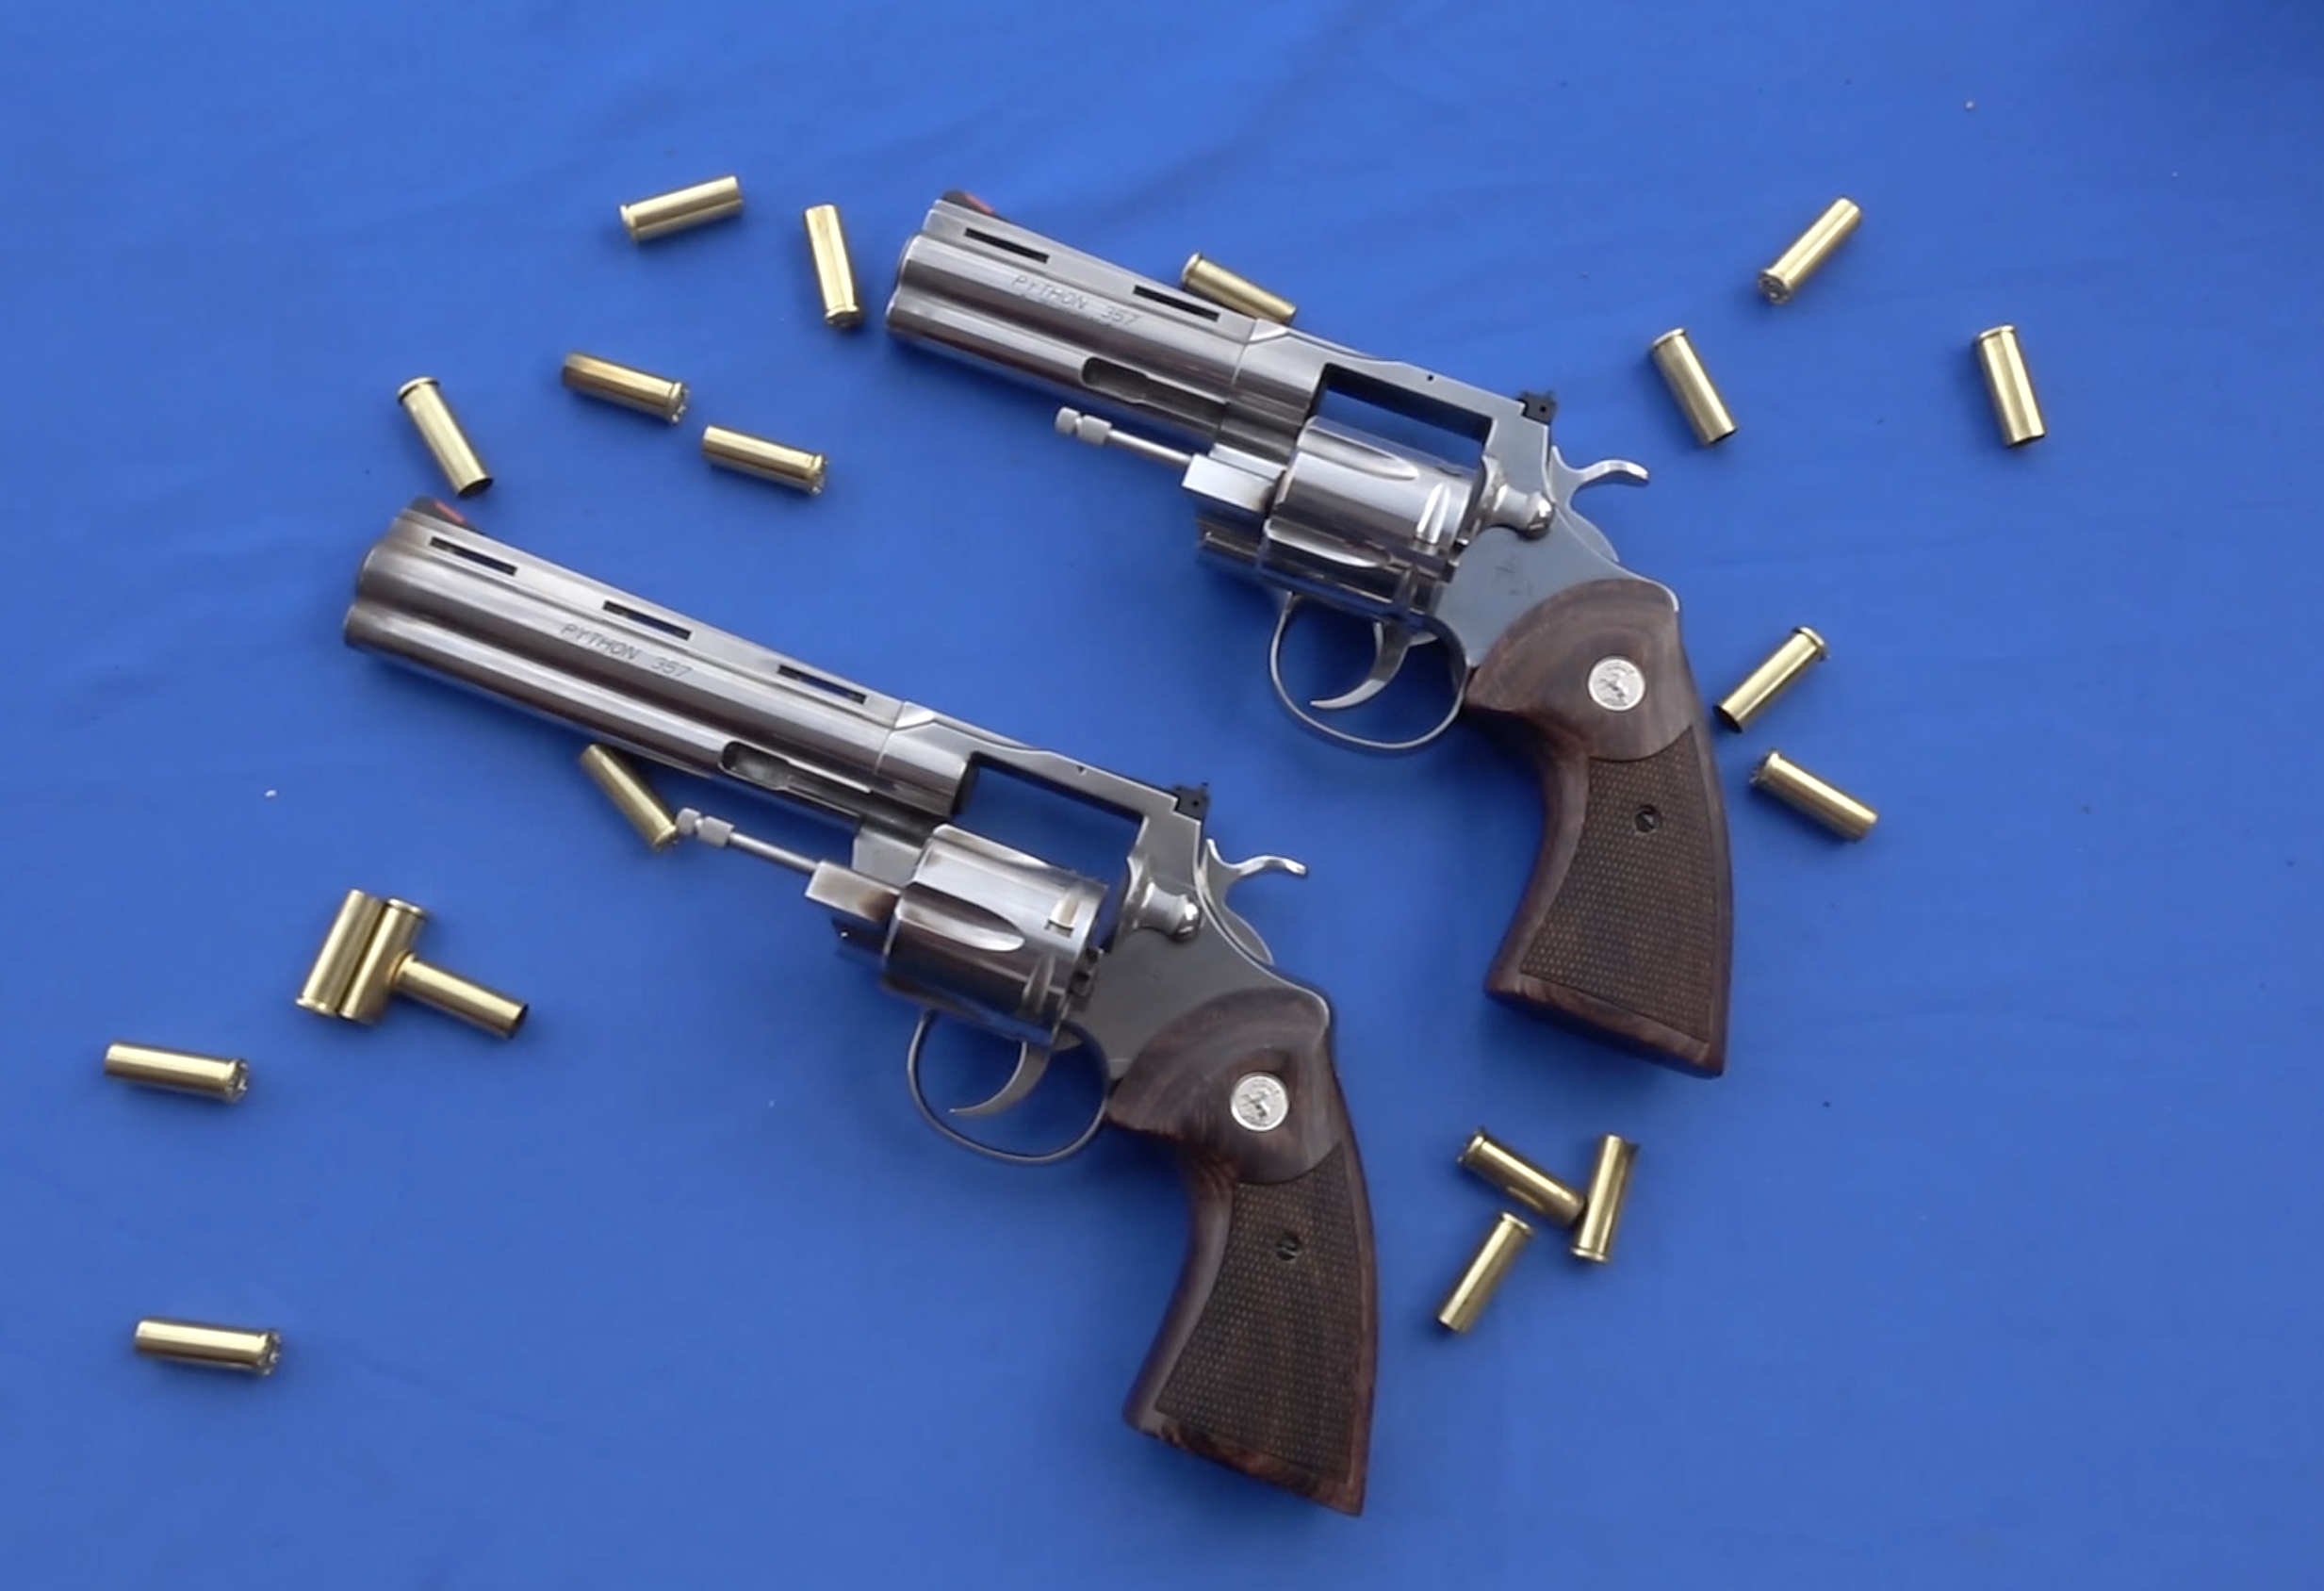 two Colt Python revolvers, one 6-inch barrel and one 4.25-inch barrel, with the wheels open on a blue background with empty cartridge cases